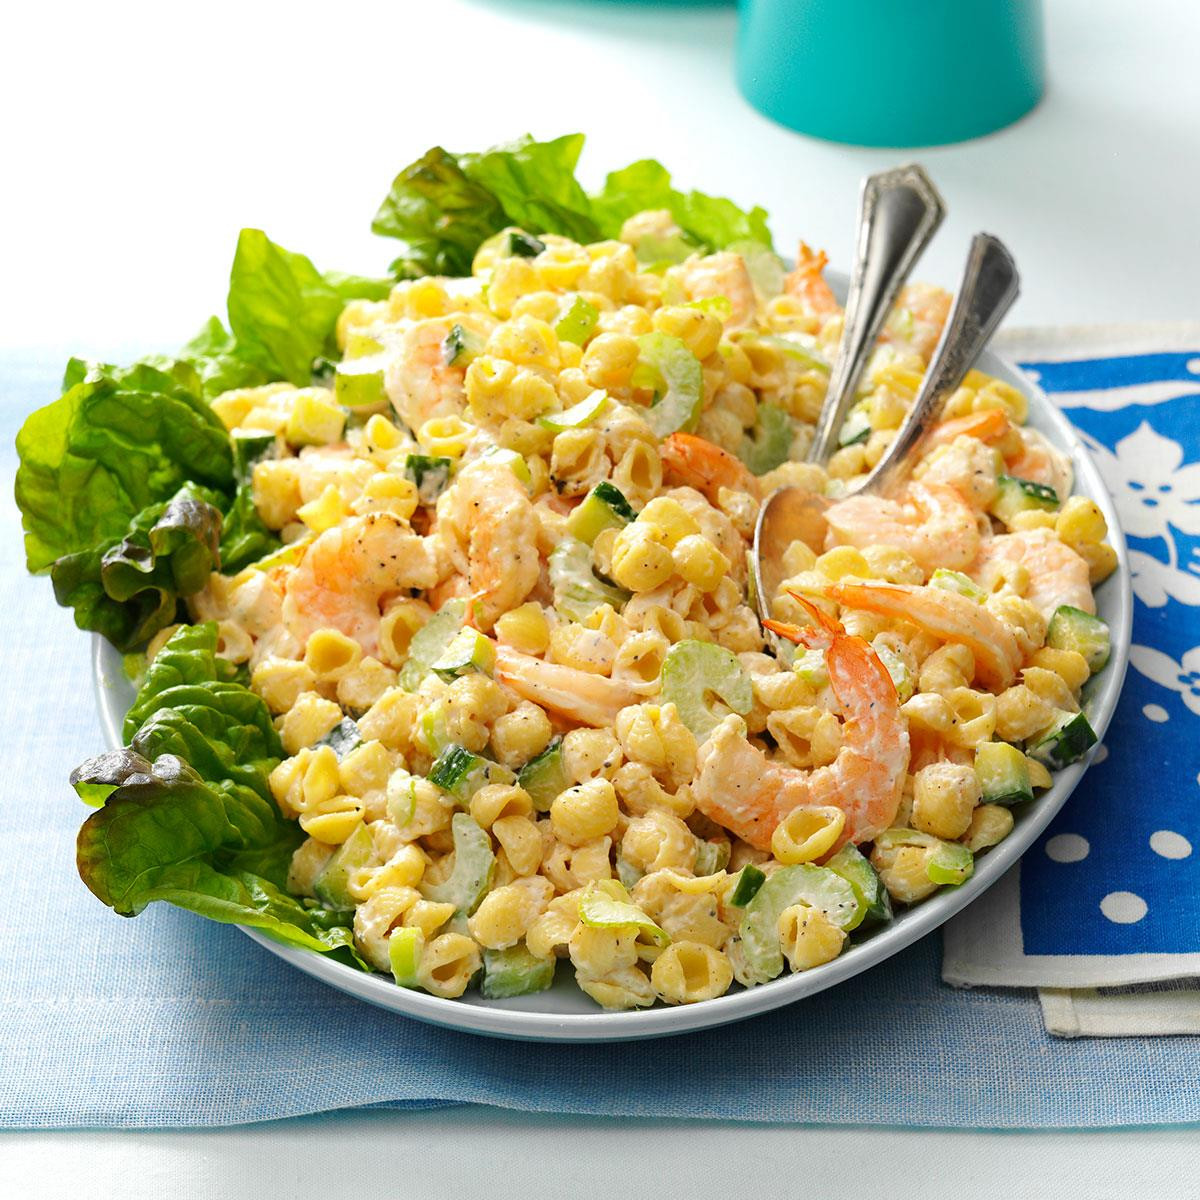 Seafood Salad Recipes Without Pasta
 cold pasta salad mayonnaise